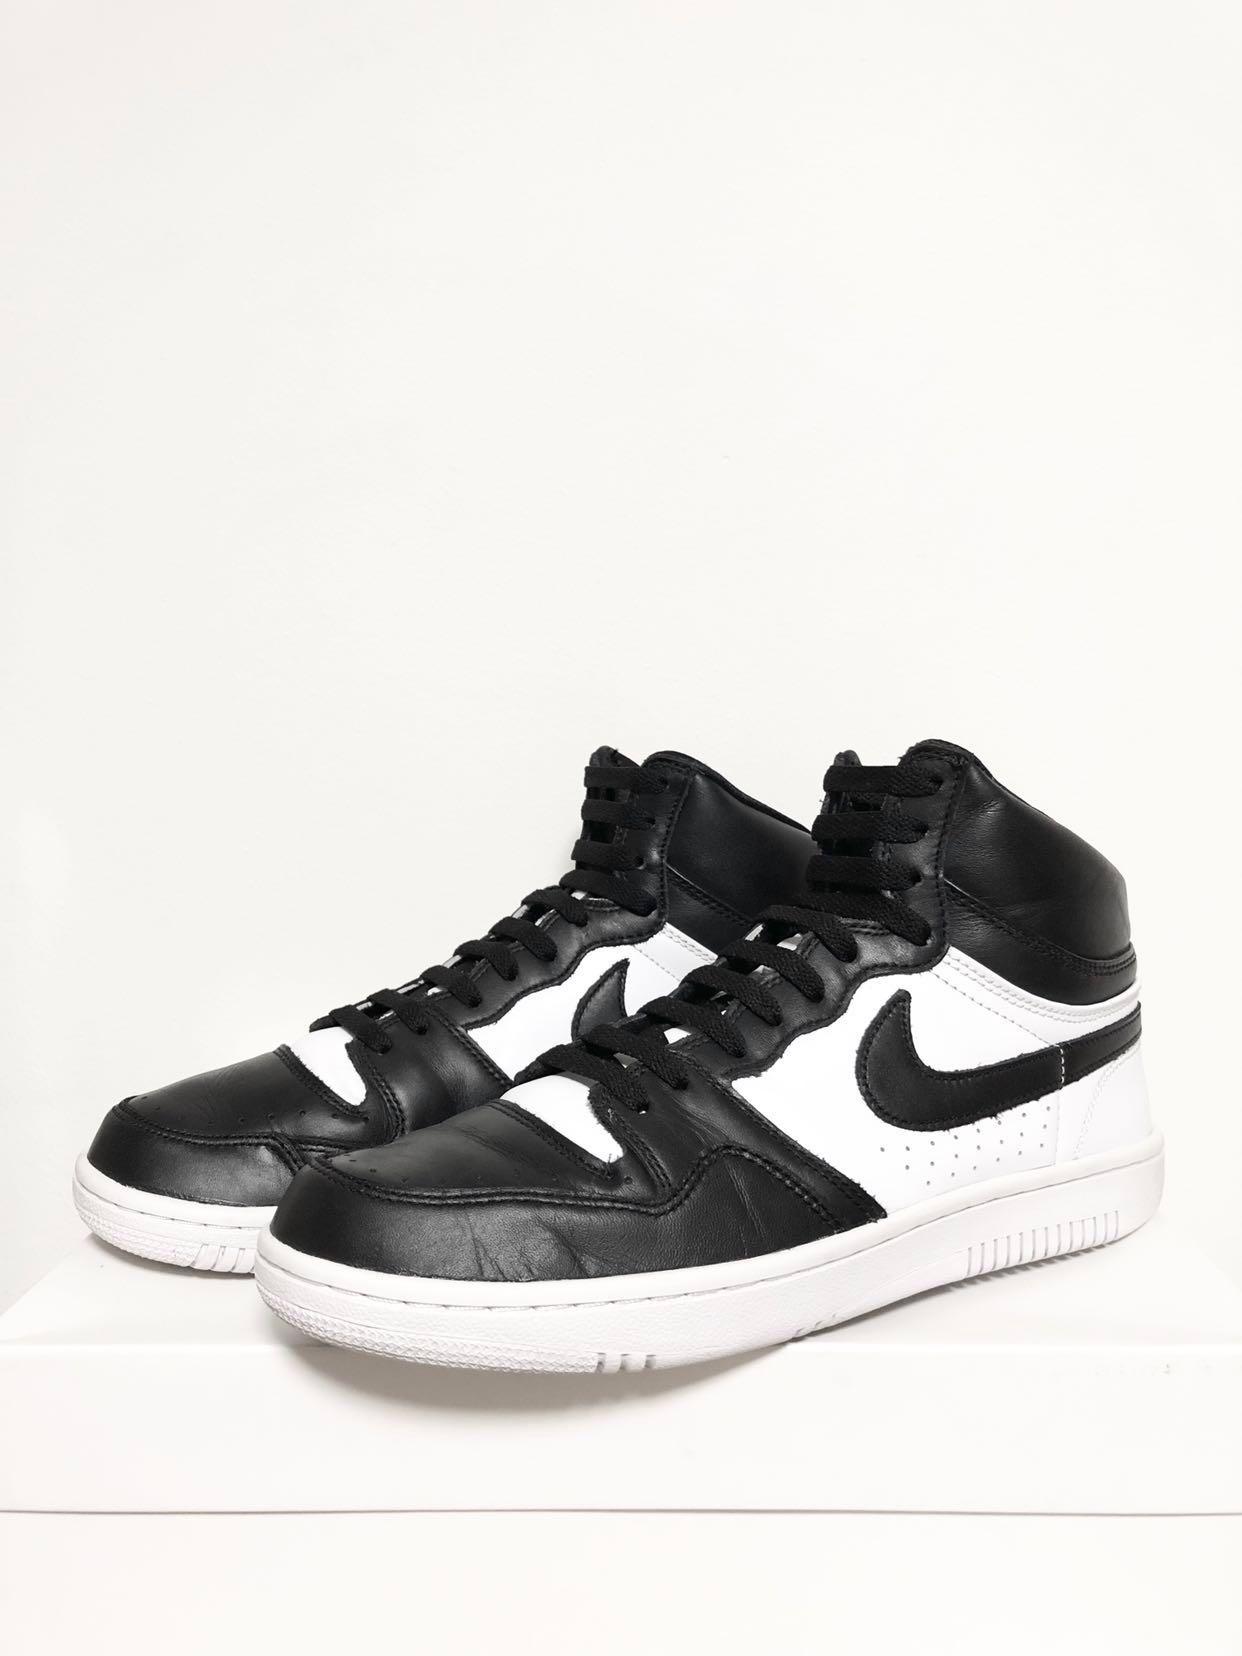 Undercover x Nike Court Force SP, Men's 